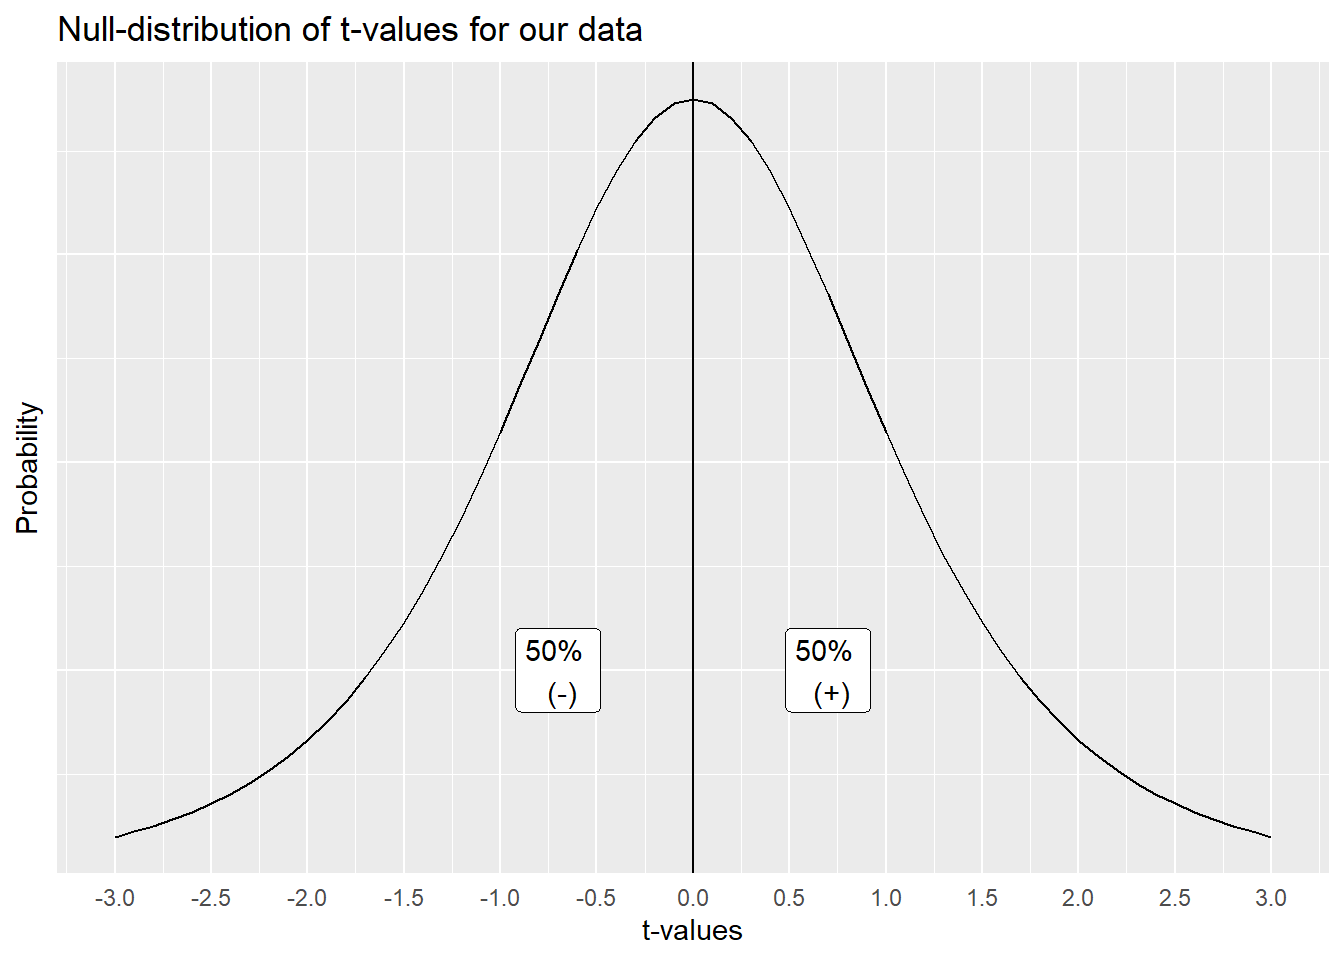 A distribution of t-values that can occur by chance alone, when there is no difference between the sample and a population